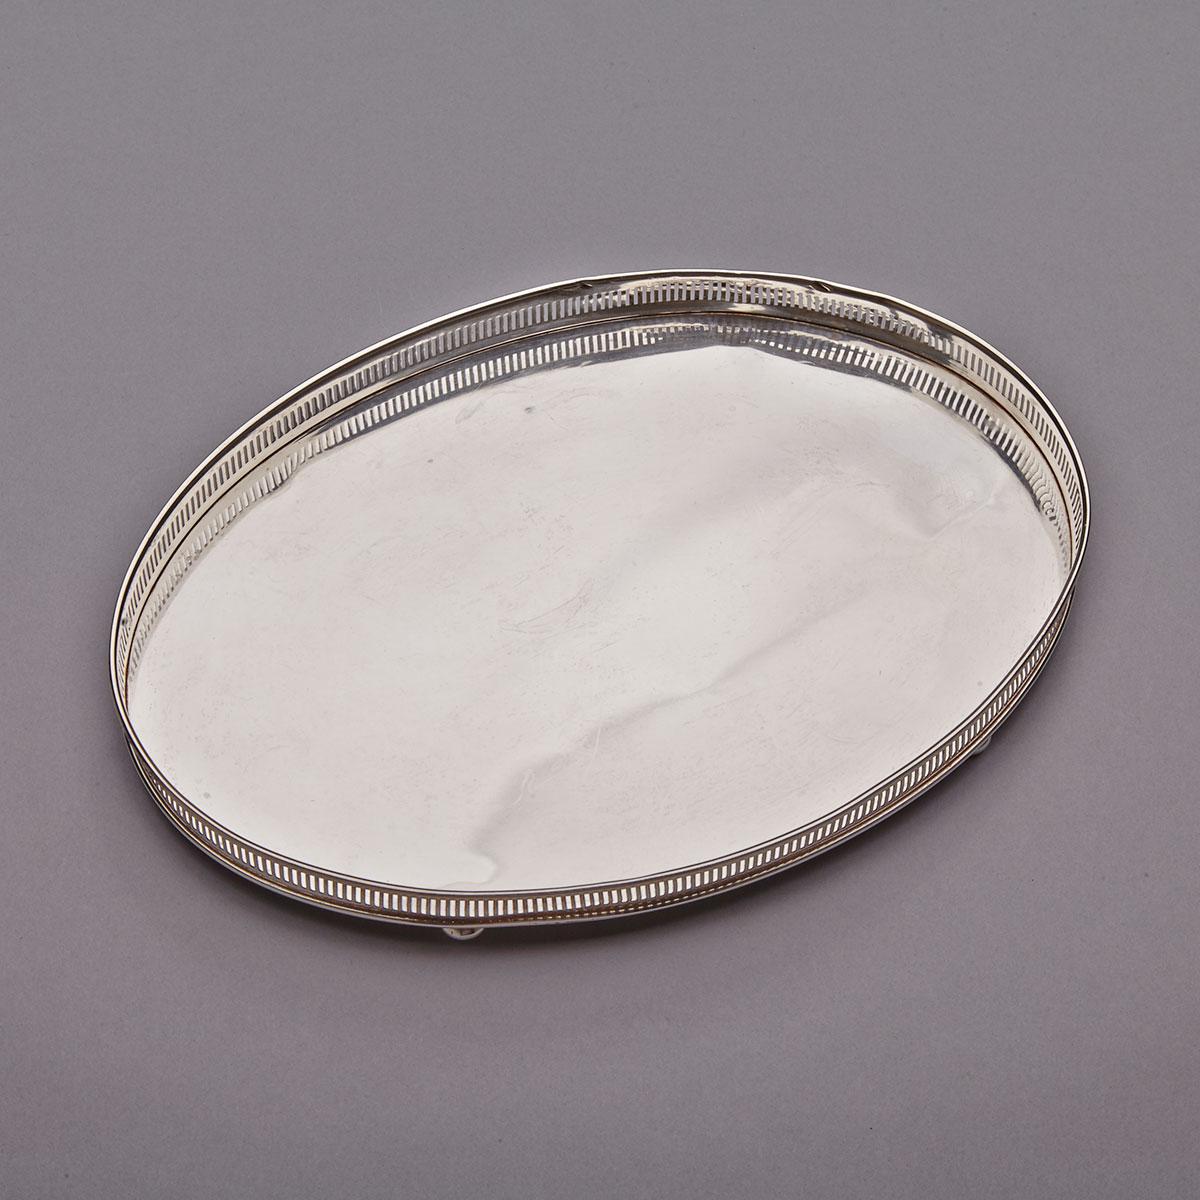 Canadian Silver Small Oval Tray, Henry Birks & Sons, Montreal, Que., 1954